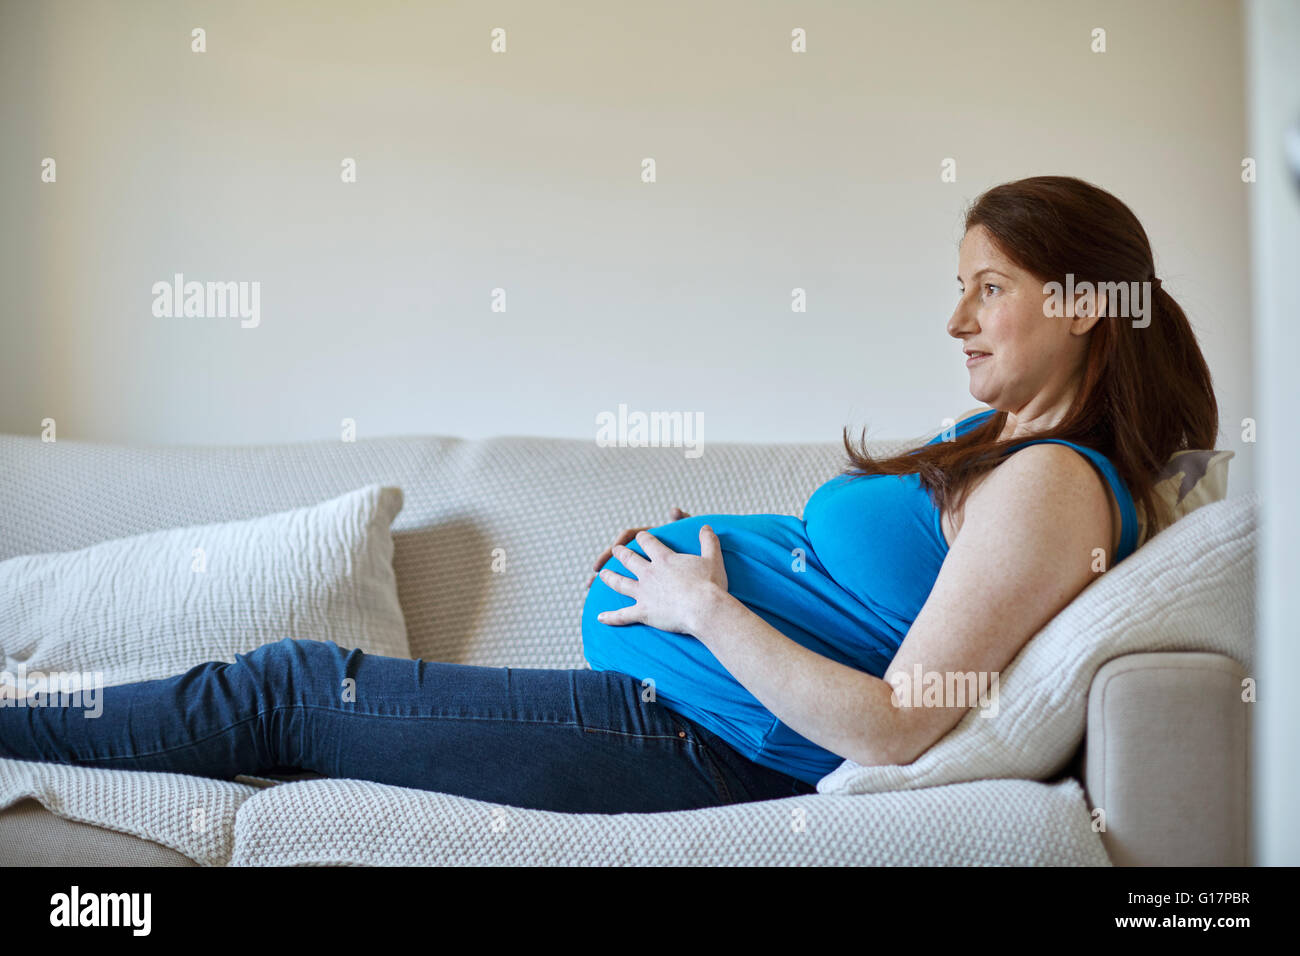 Vue latérale du pregnant woman holding estomac, relaxing on sofa looking away smiling Banque D'Images